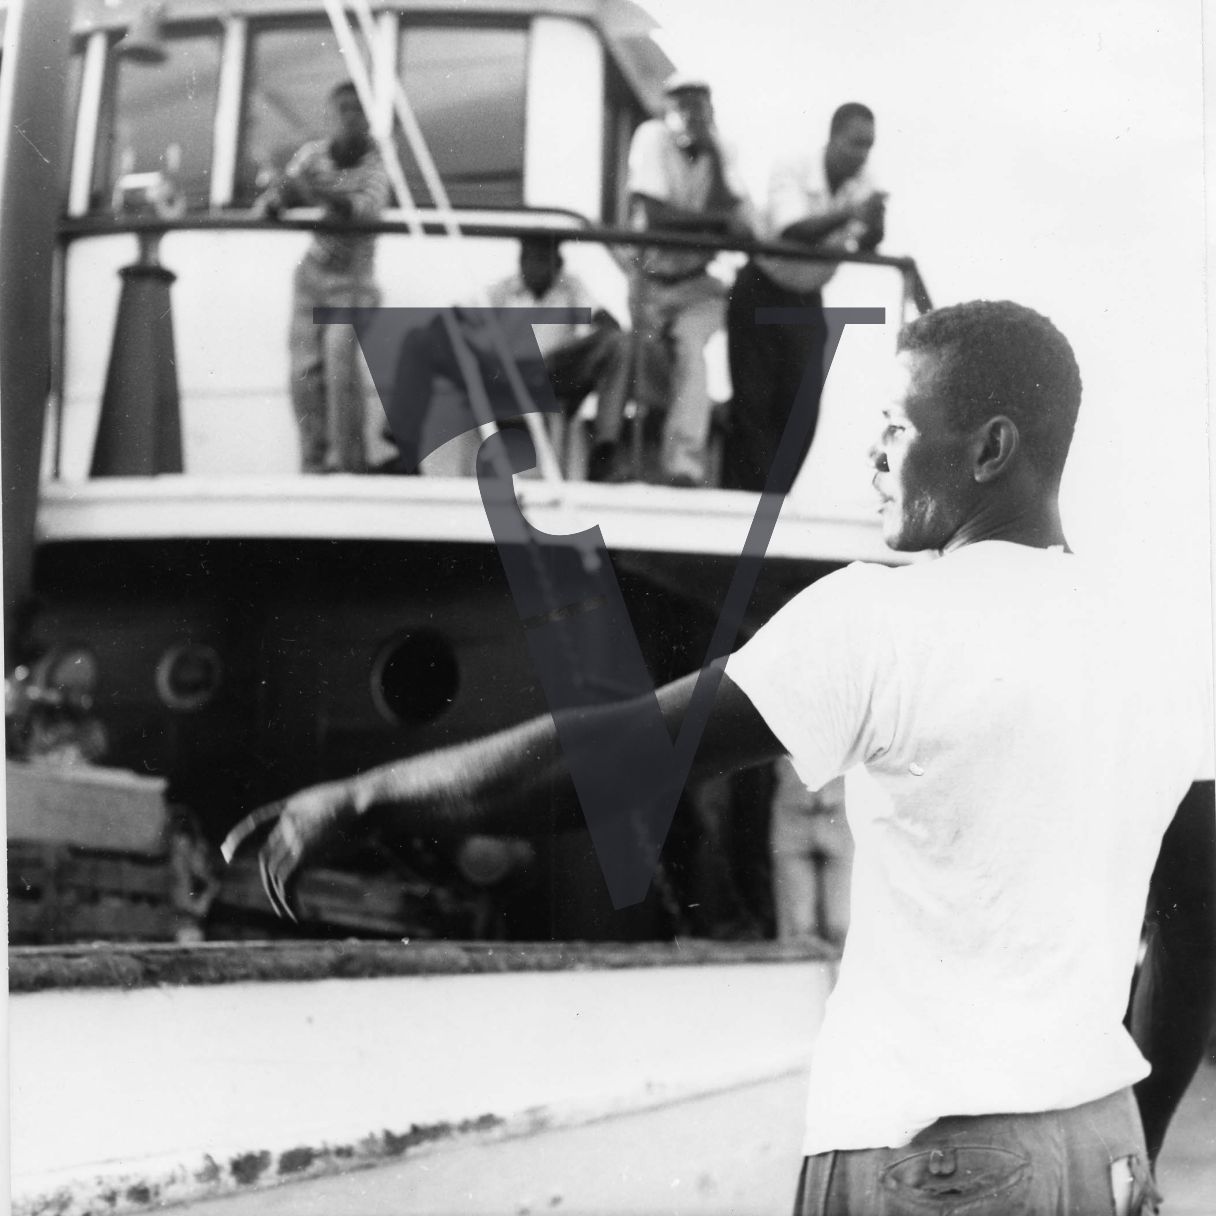 Belize, harbour, fishing boat, man pointing.